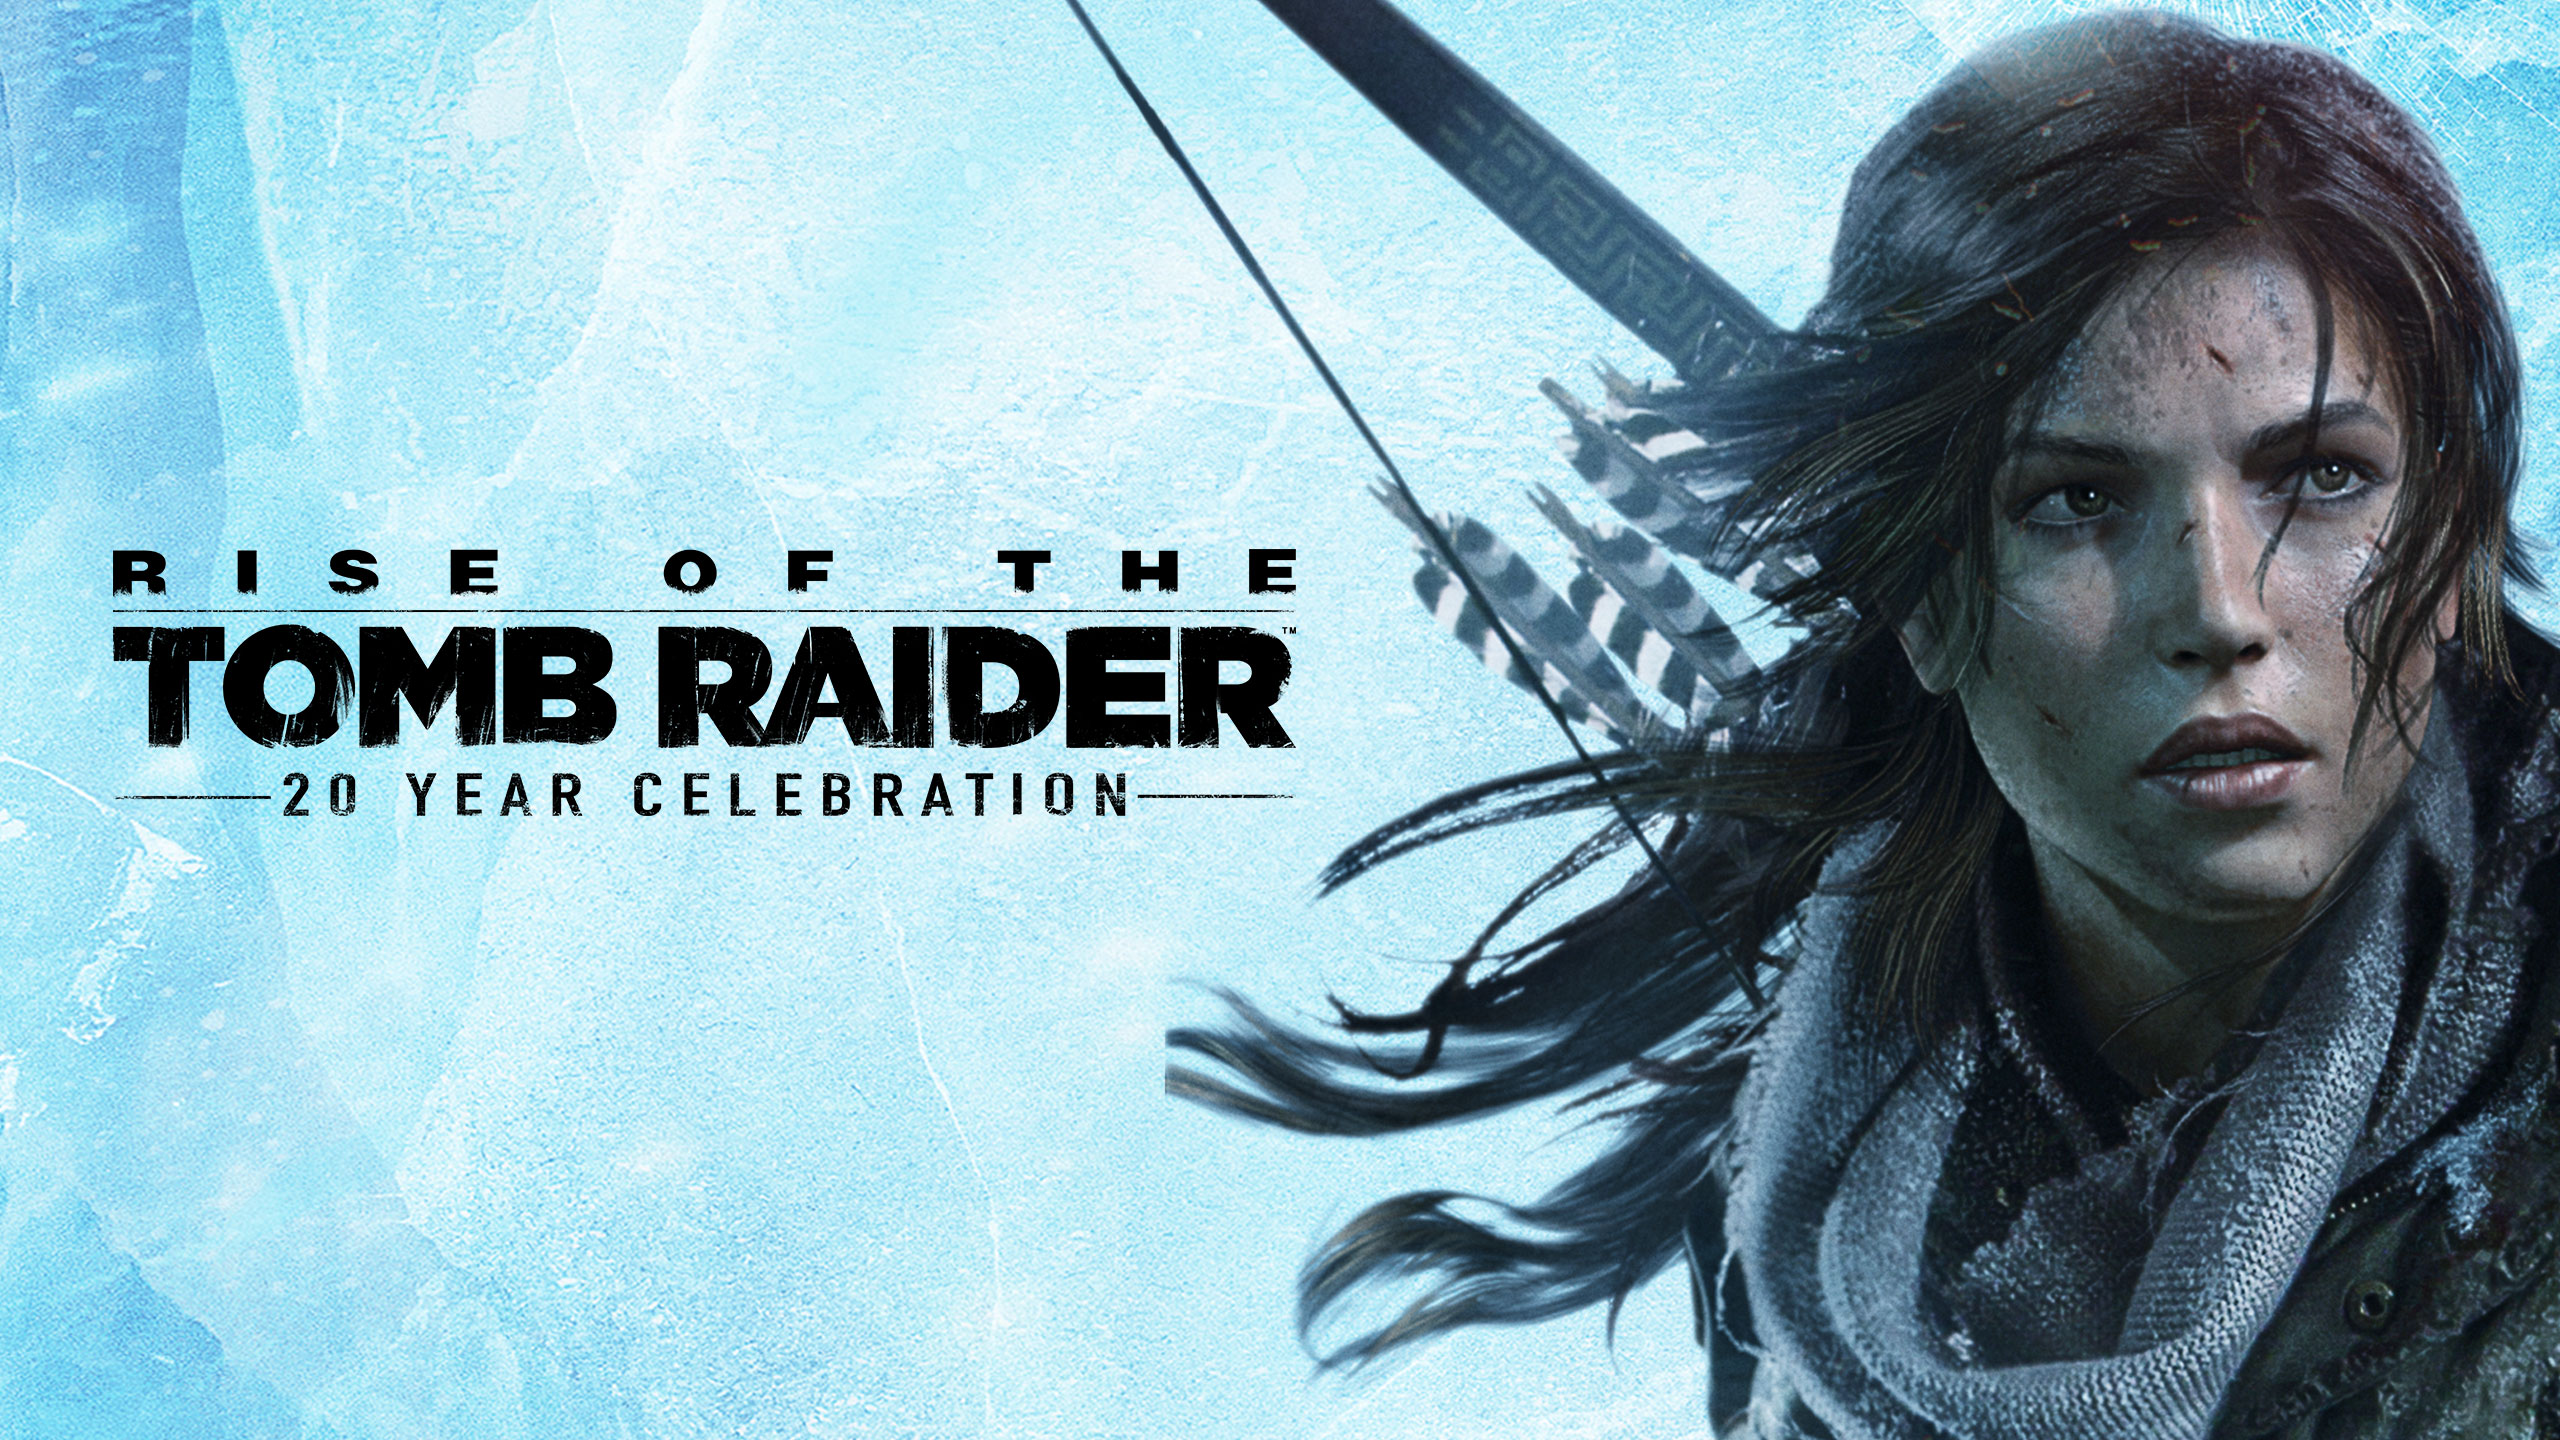 Rise of the Tomb Raider: 20 Year Celebration | Download and Buy Today - Epic Games Store